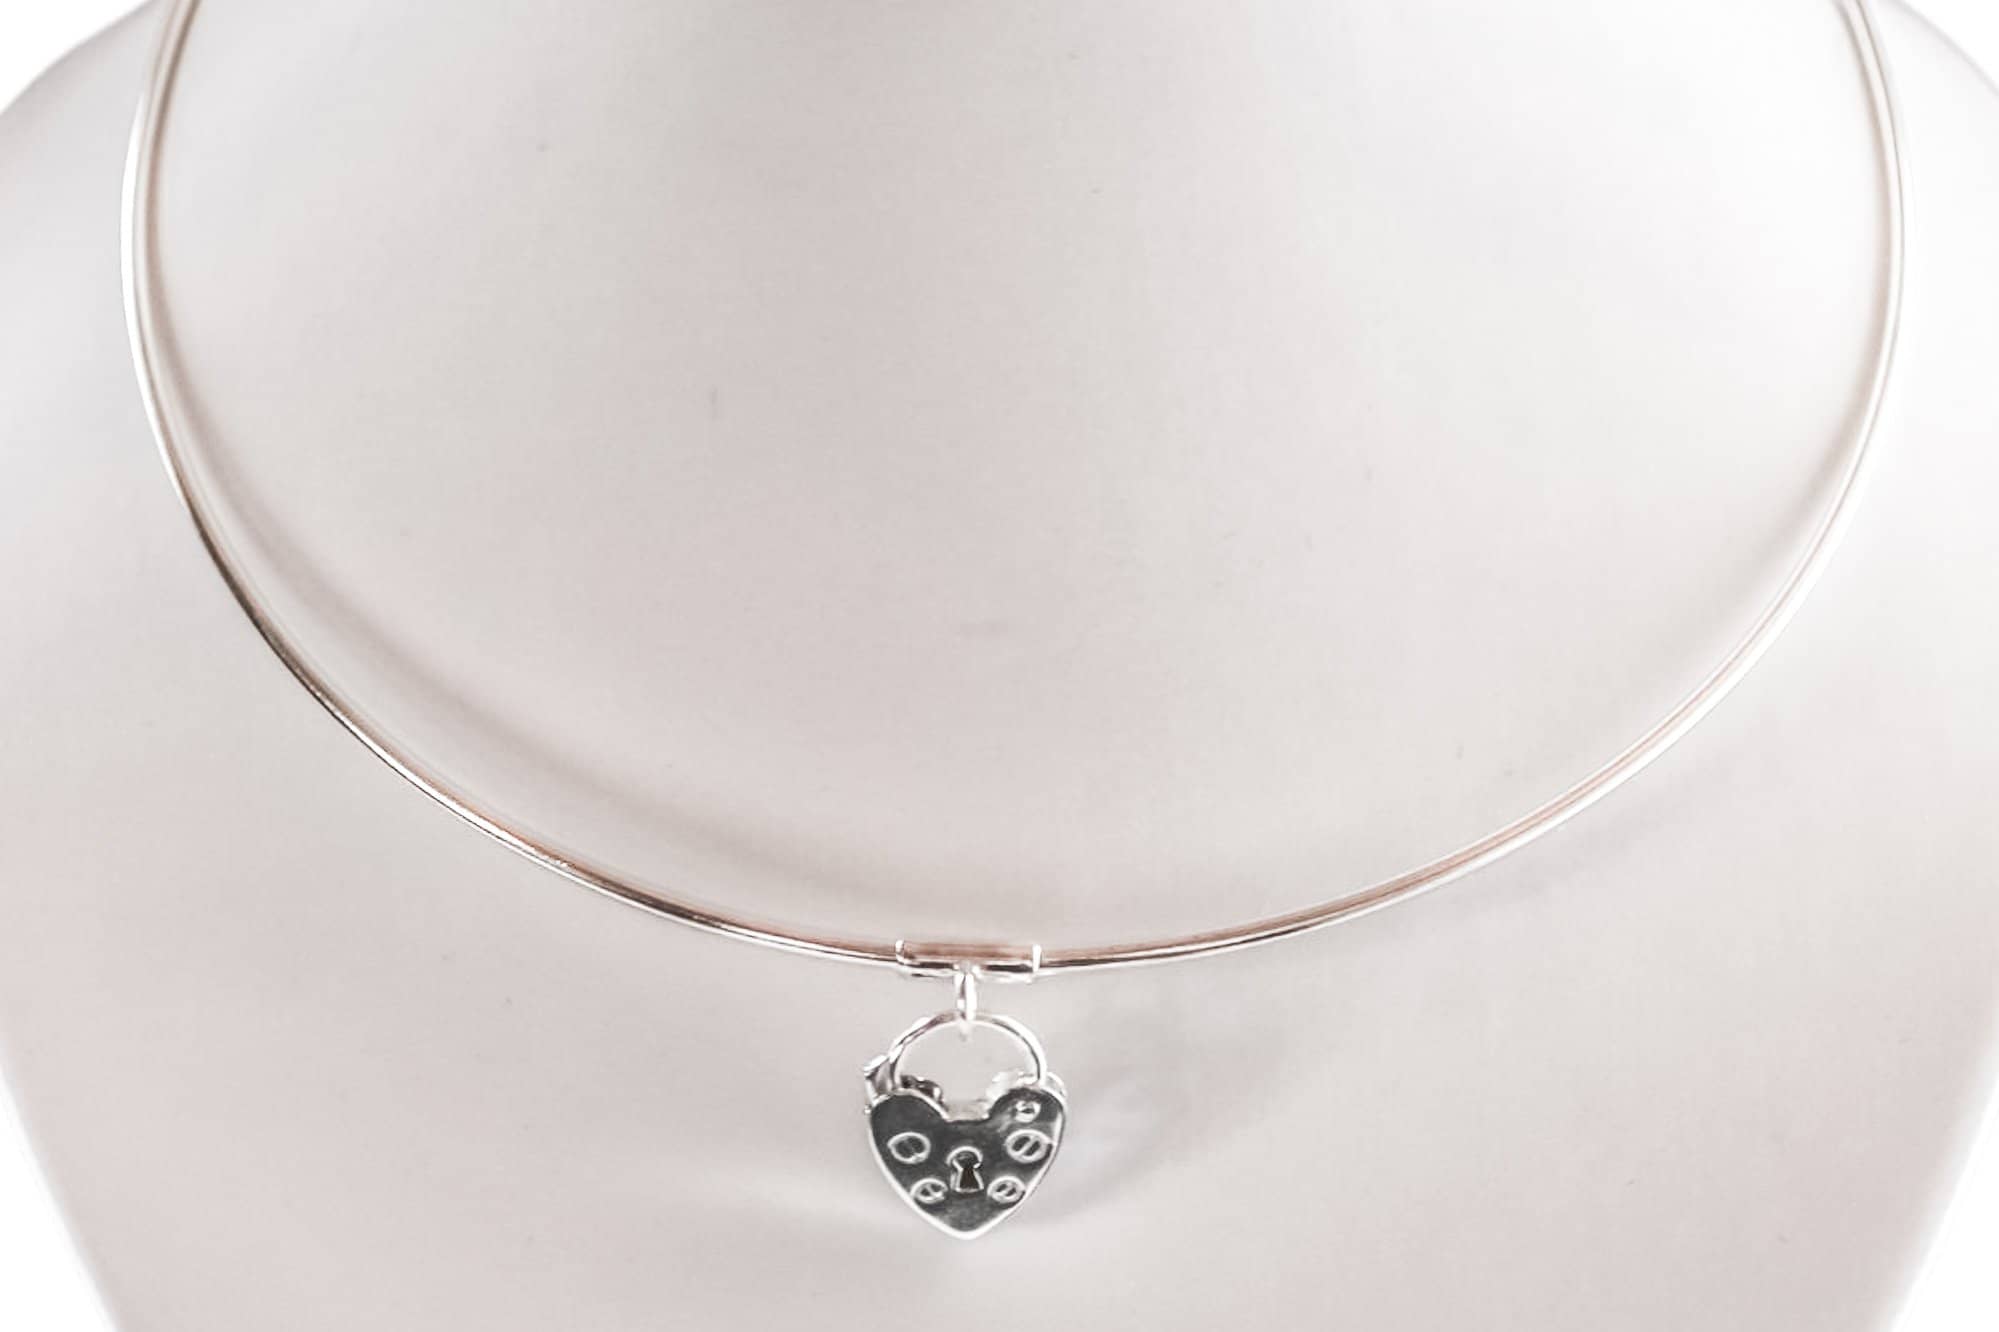 Buy Locking Necklace Submissive Choker Day Collar Nickel Heart Lock Online  in India - Etsy